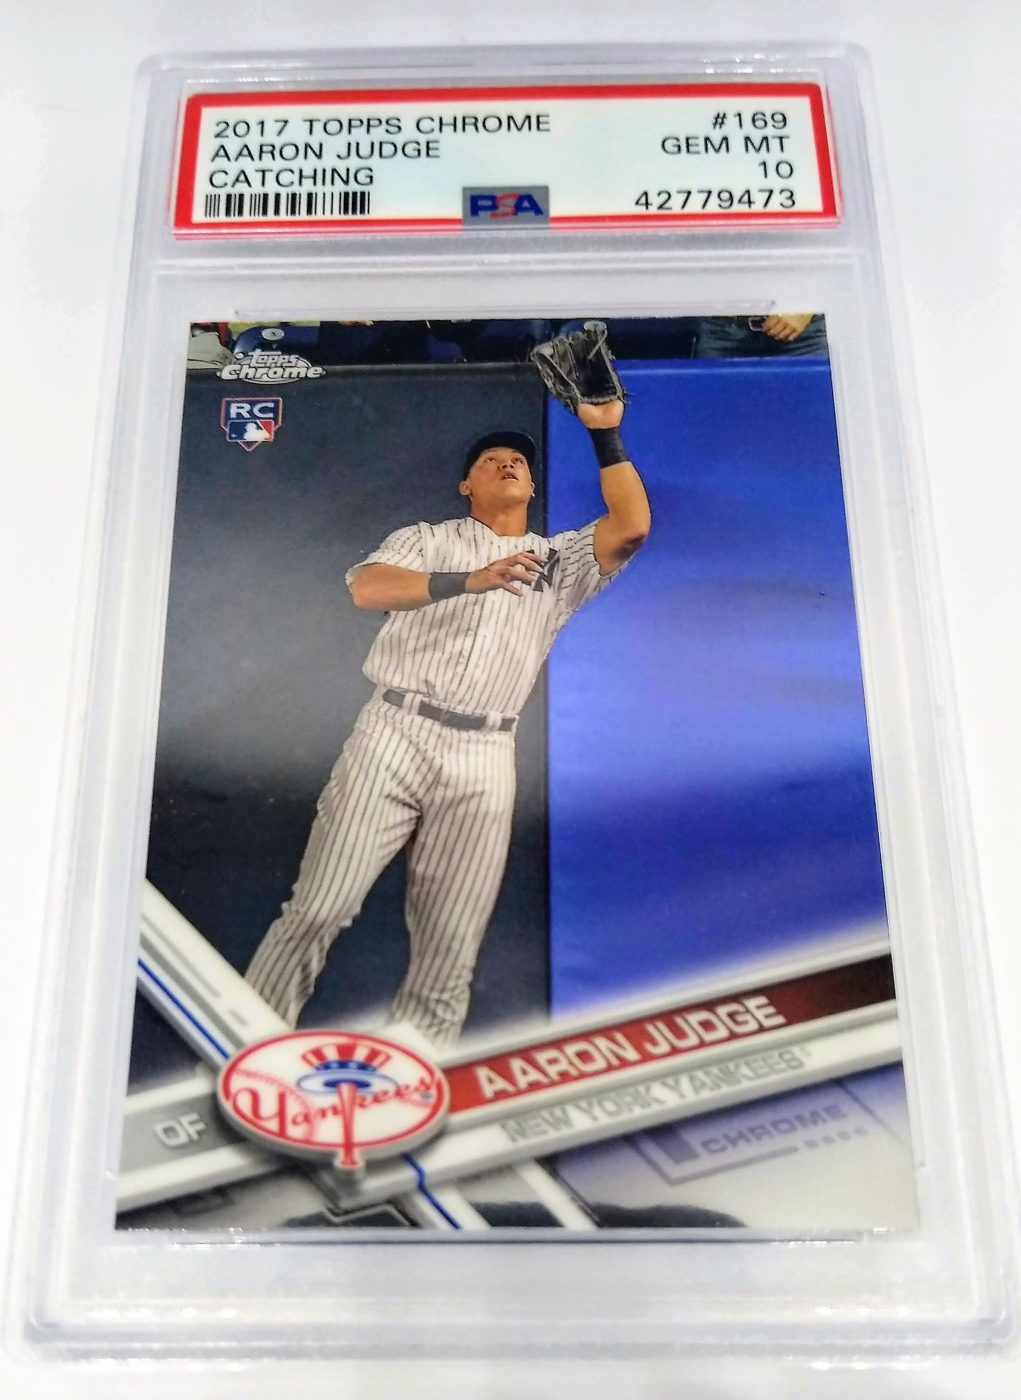 2017 Topps Chrome Aaron Judge Catching PSA 10 Graded Rookie